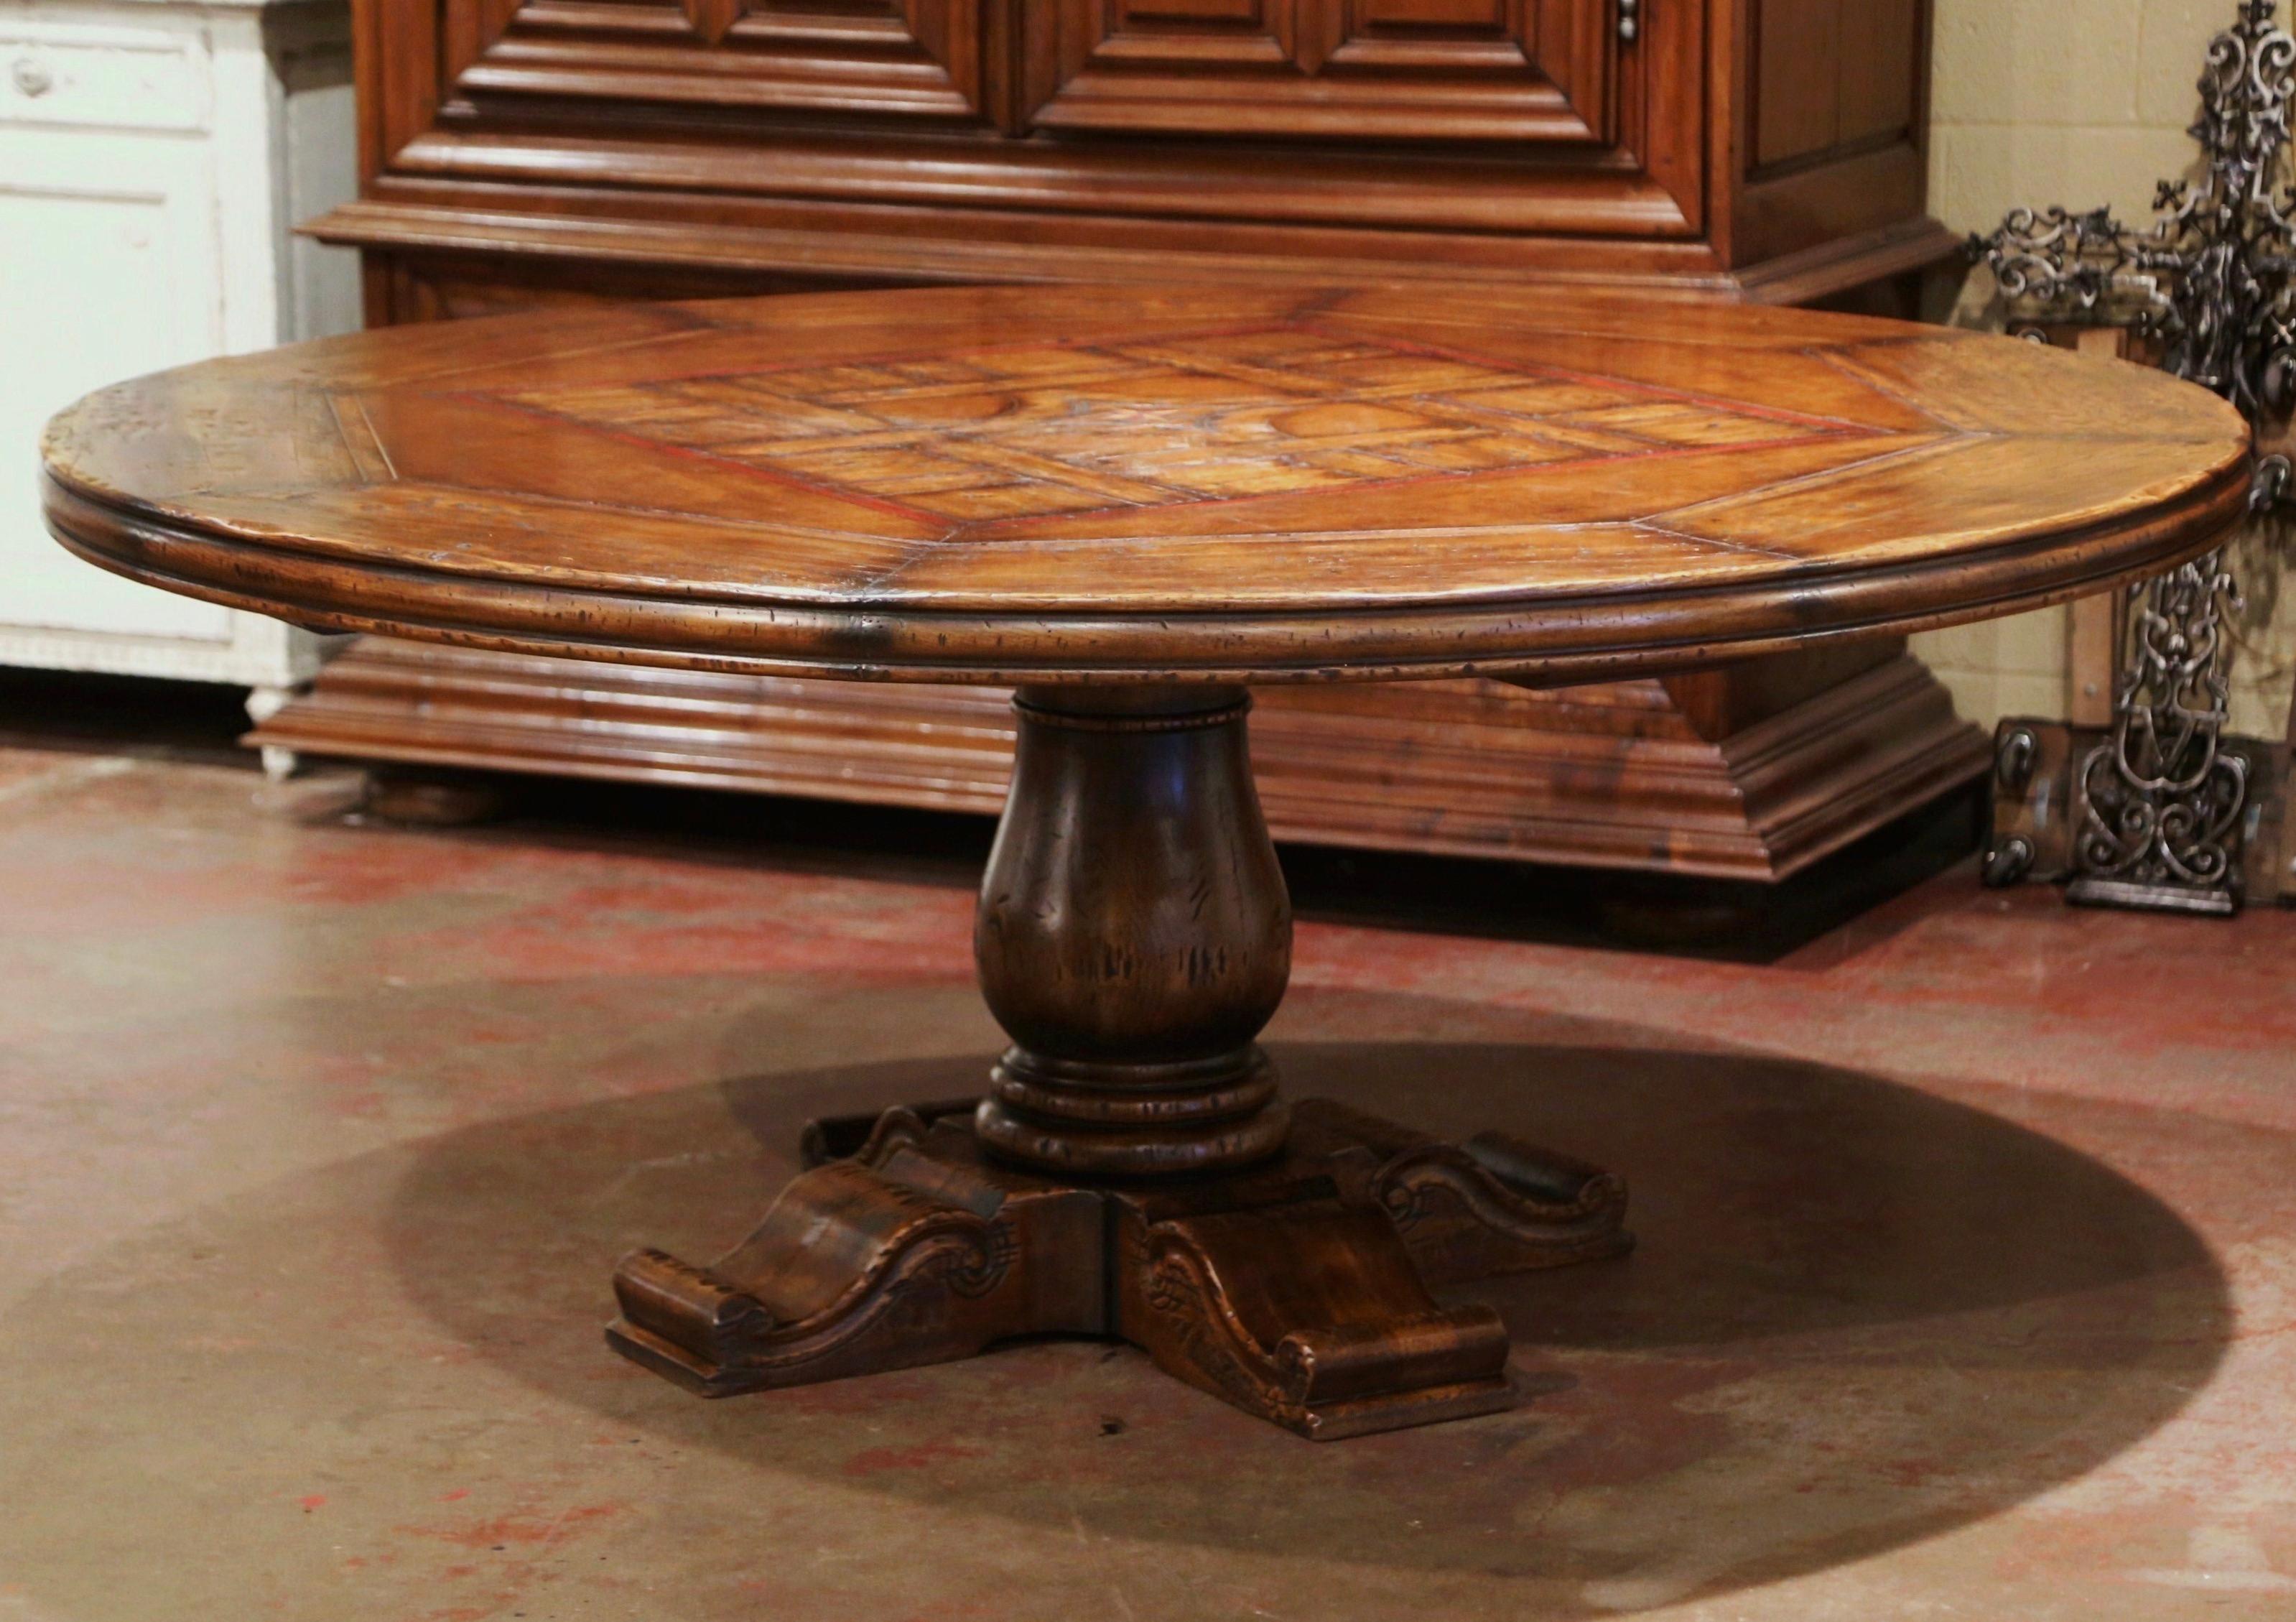 Hand-Carved Mid-Century French Carved Walnut Pedestal Round Dining Table with Parquetry Top